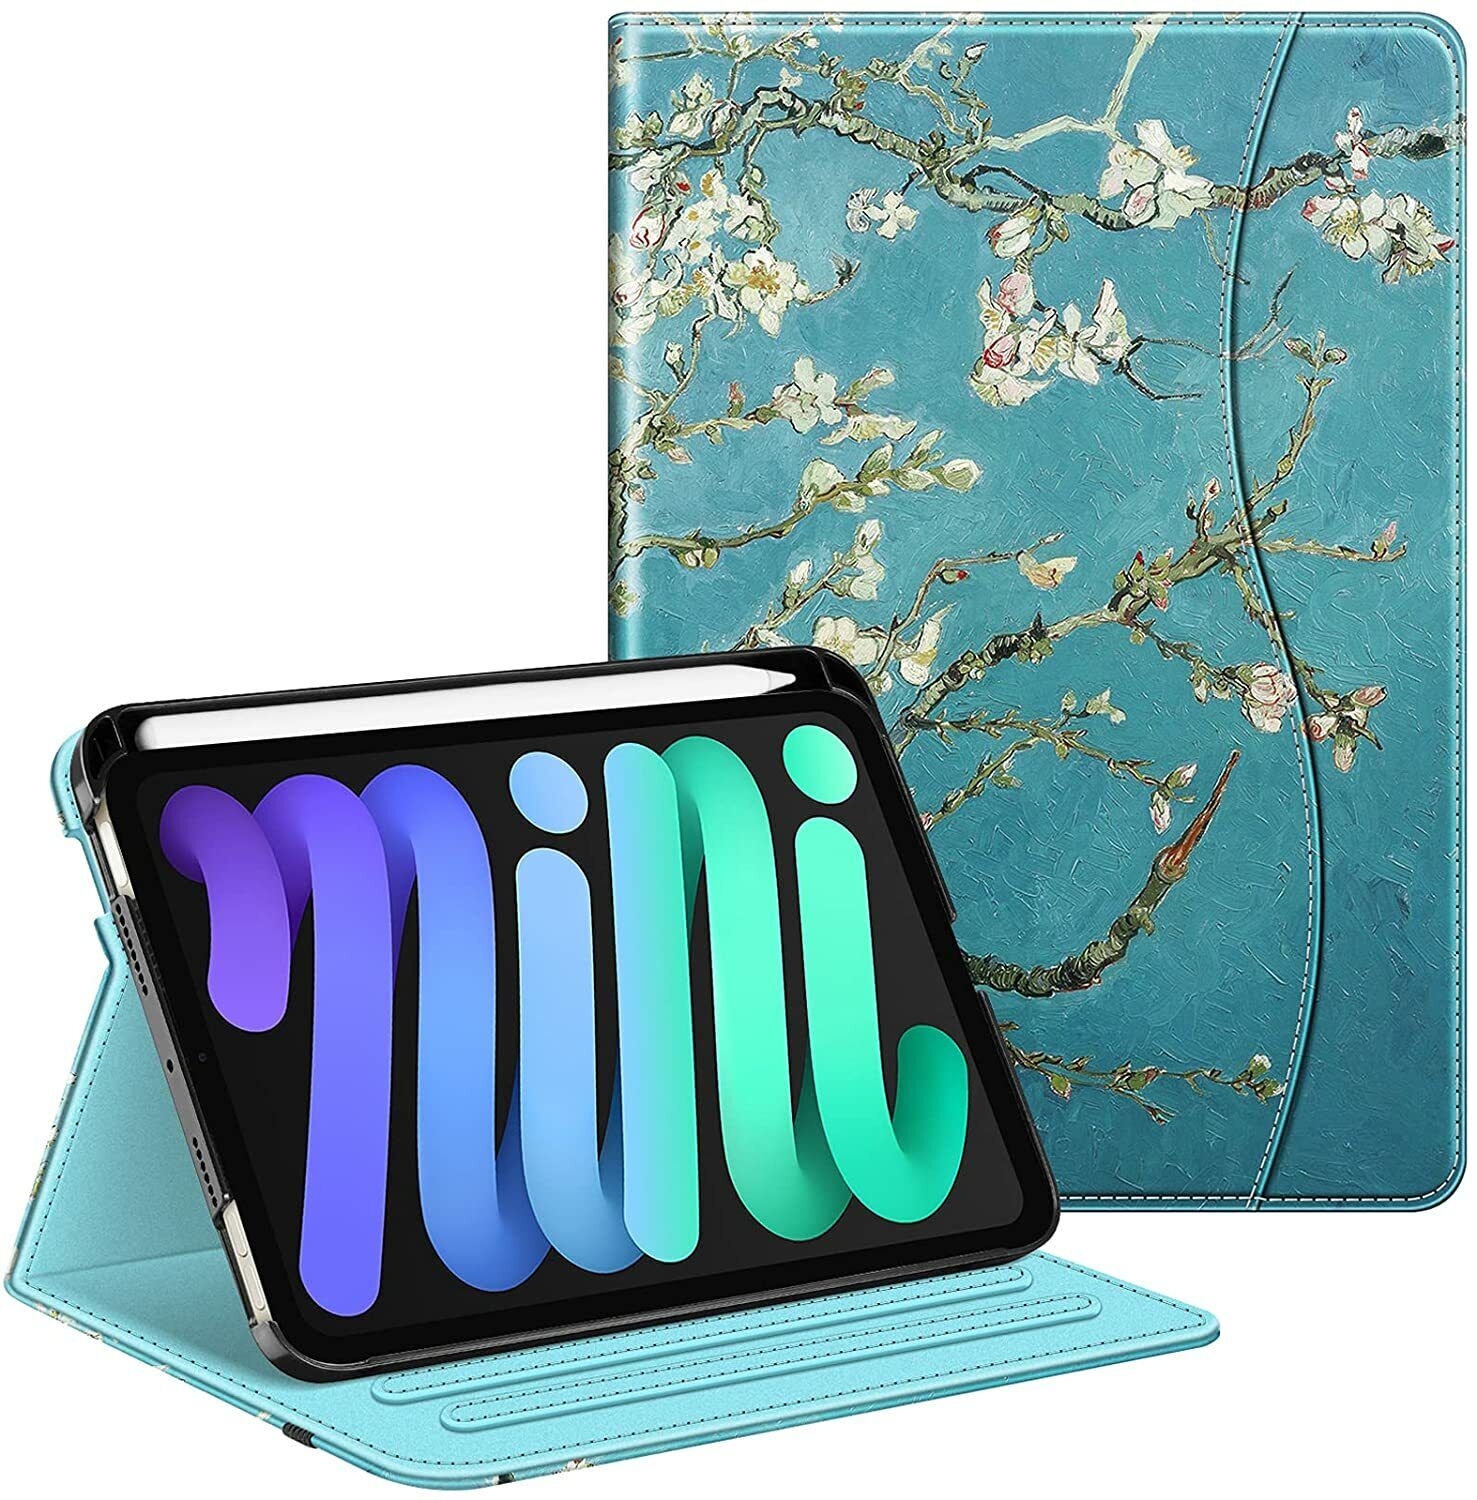  Folio Case for iPad Mini 6 2021 8.3 Inch  Smart Stand Cover with Pencil Holder